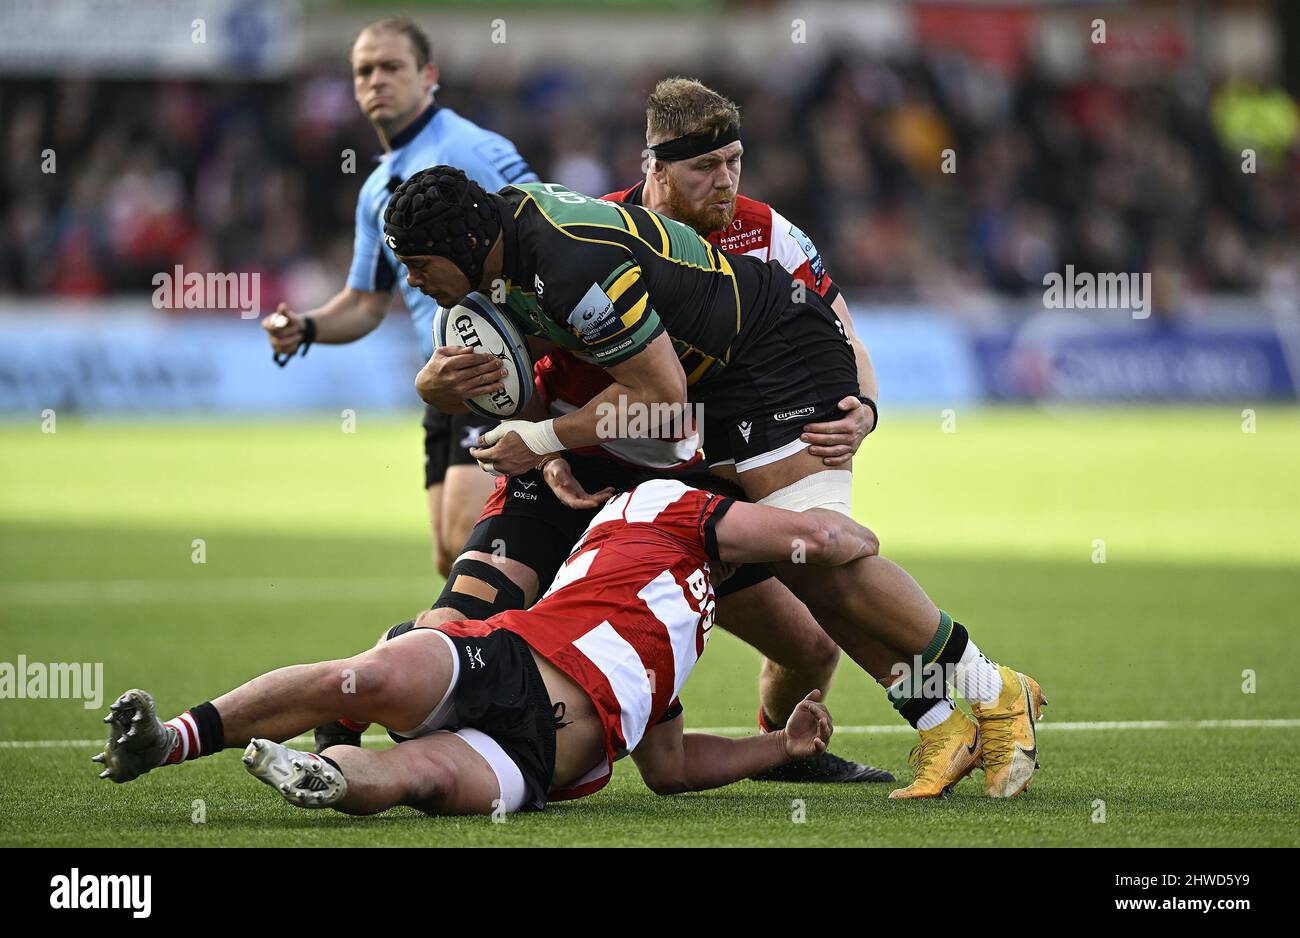 Gloucester, United Kingdom. 05th Mar, 2022. Premiership Rugby. Gloucester Rugby V Northampton Saints. Kingsholm Stadium. Gloucester. Juarno Augustus (Northampton Saints) is tackled by Santiago Socino (Gloucester Rugby, on ground) and Harry Elrington (Gloucester Rugby) during the Gloucester Rugby V Northampton Saints Gallagher Premiership rugby match. Credit: Sport In Pictures/Alamy Live News Stock Photo